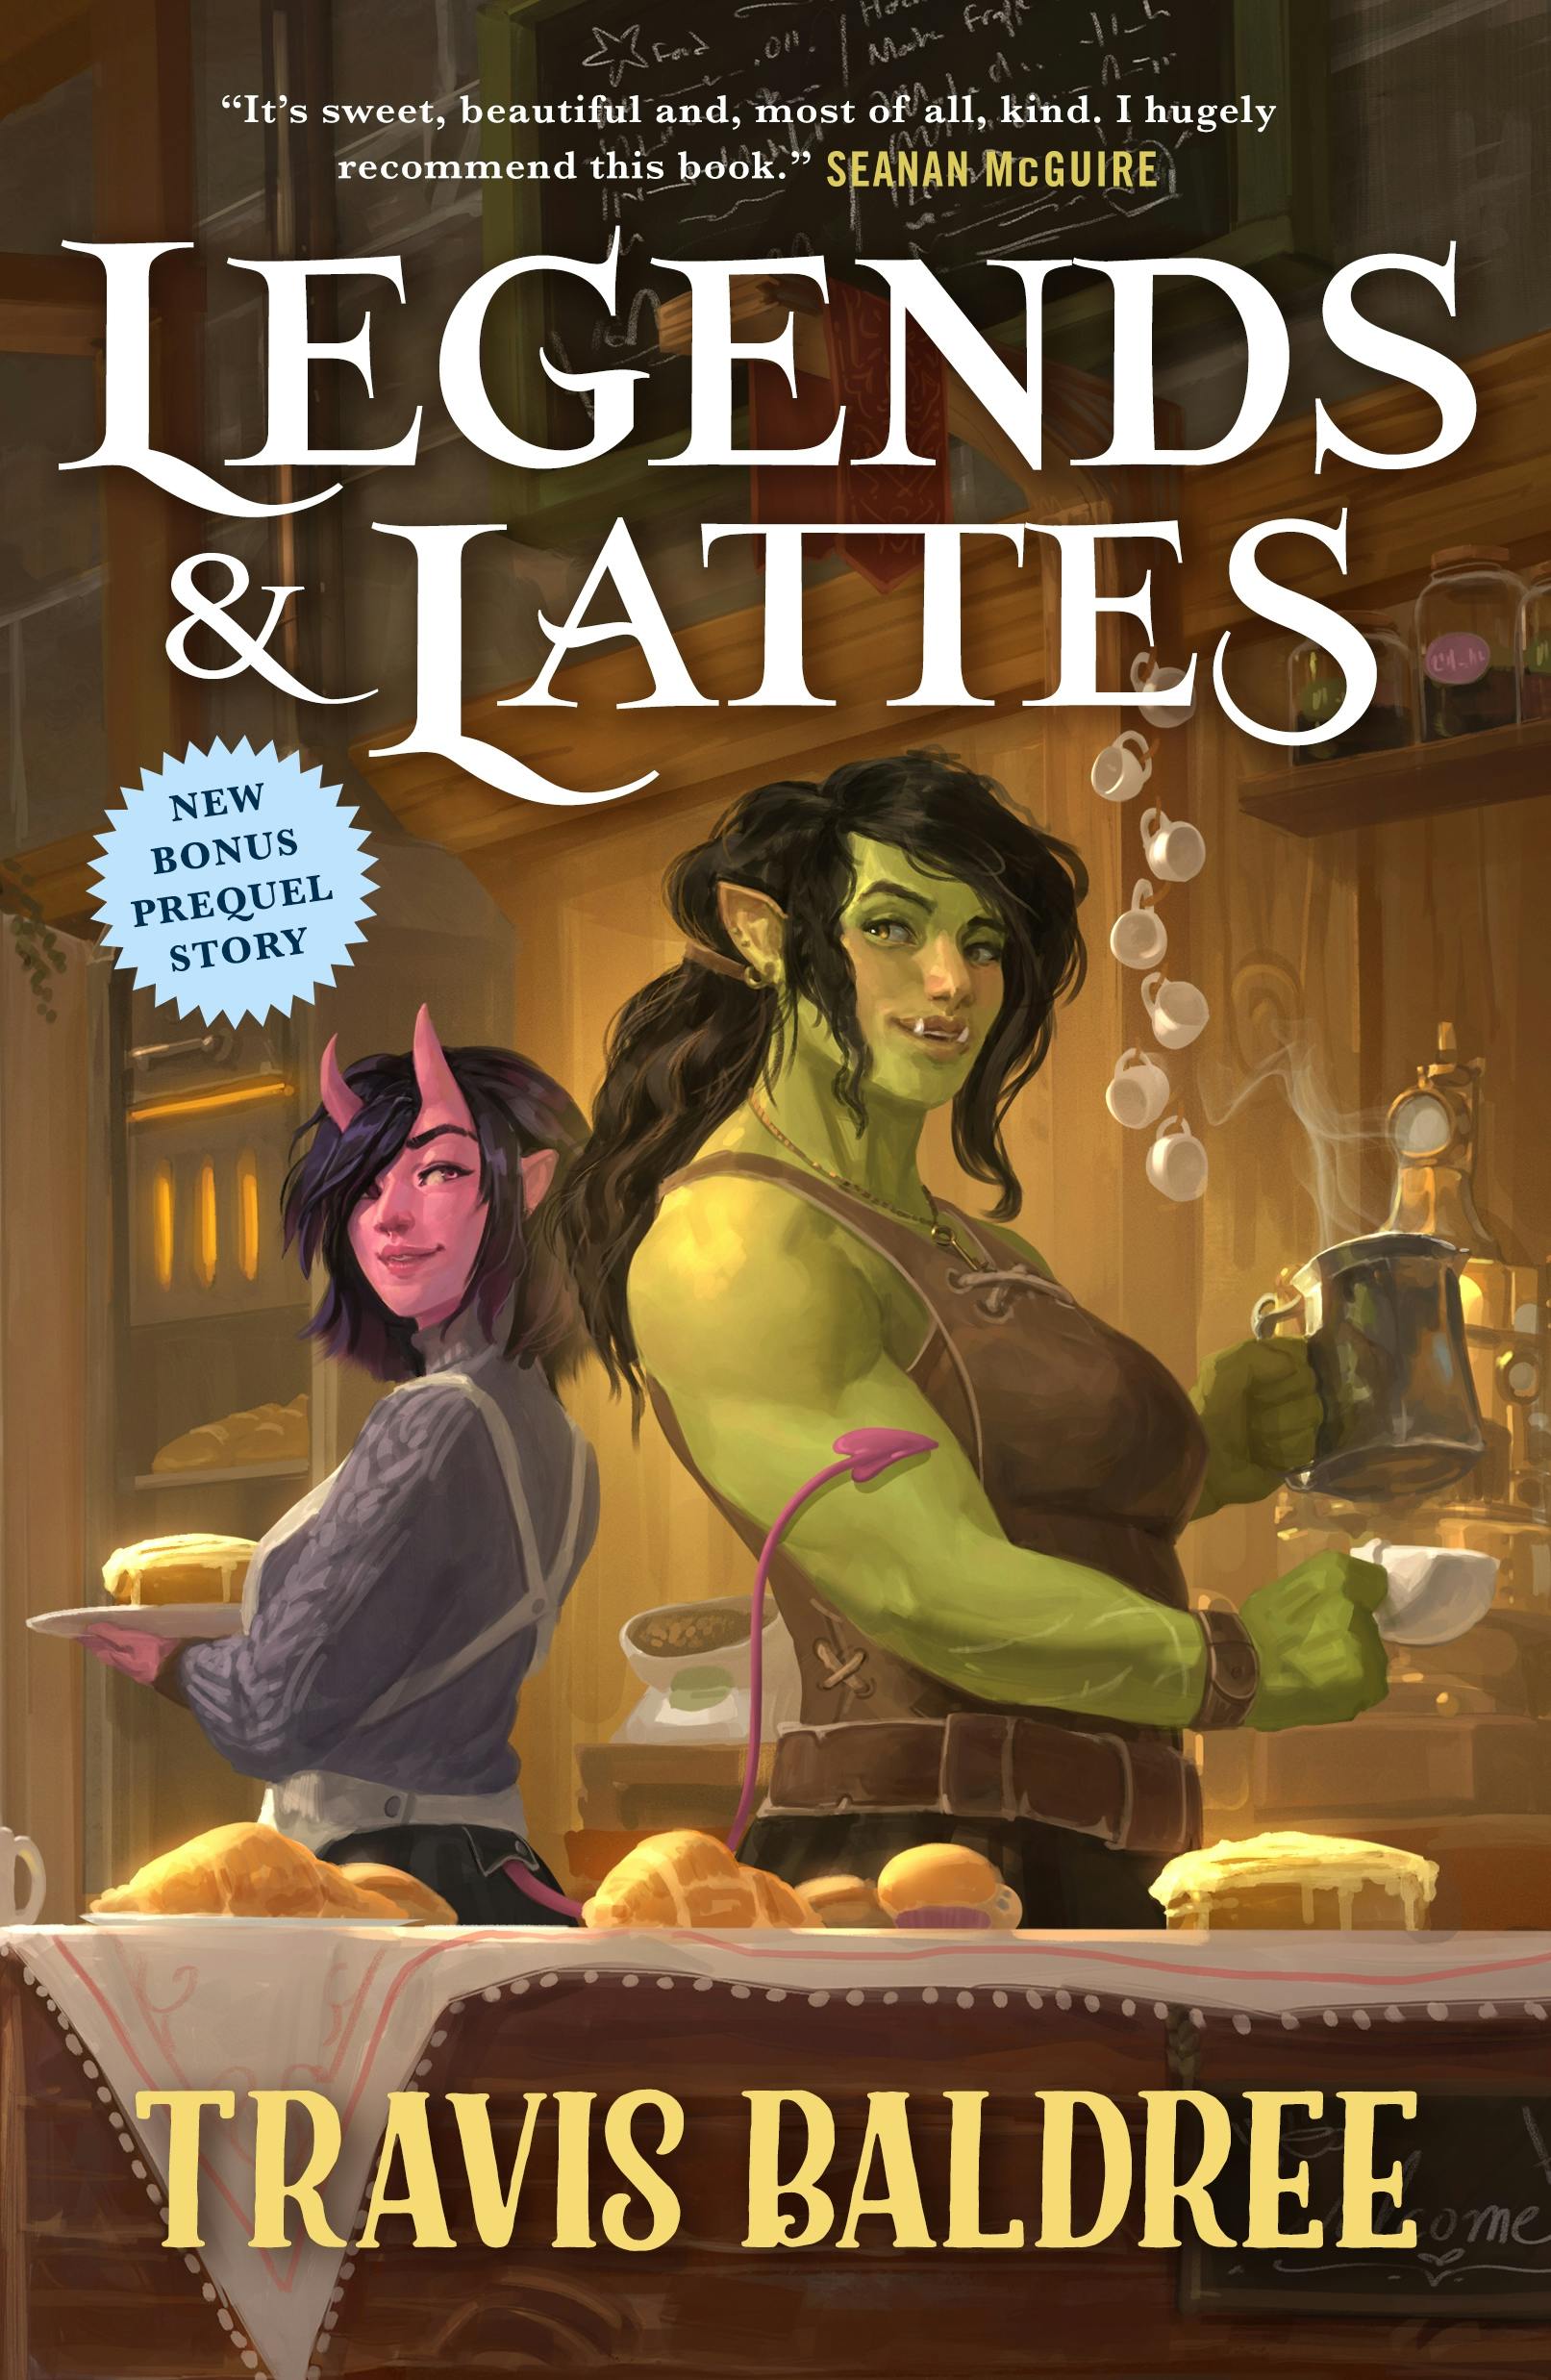 Cover for the book titled as: Legends & Lattes